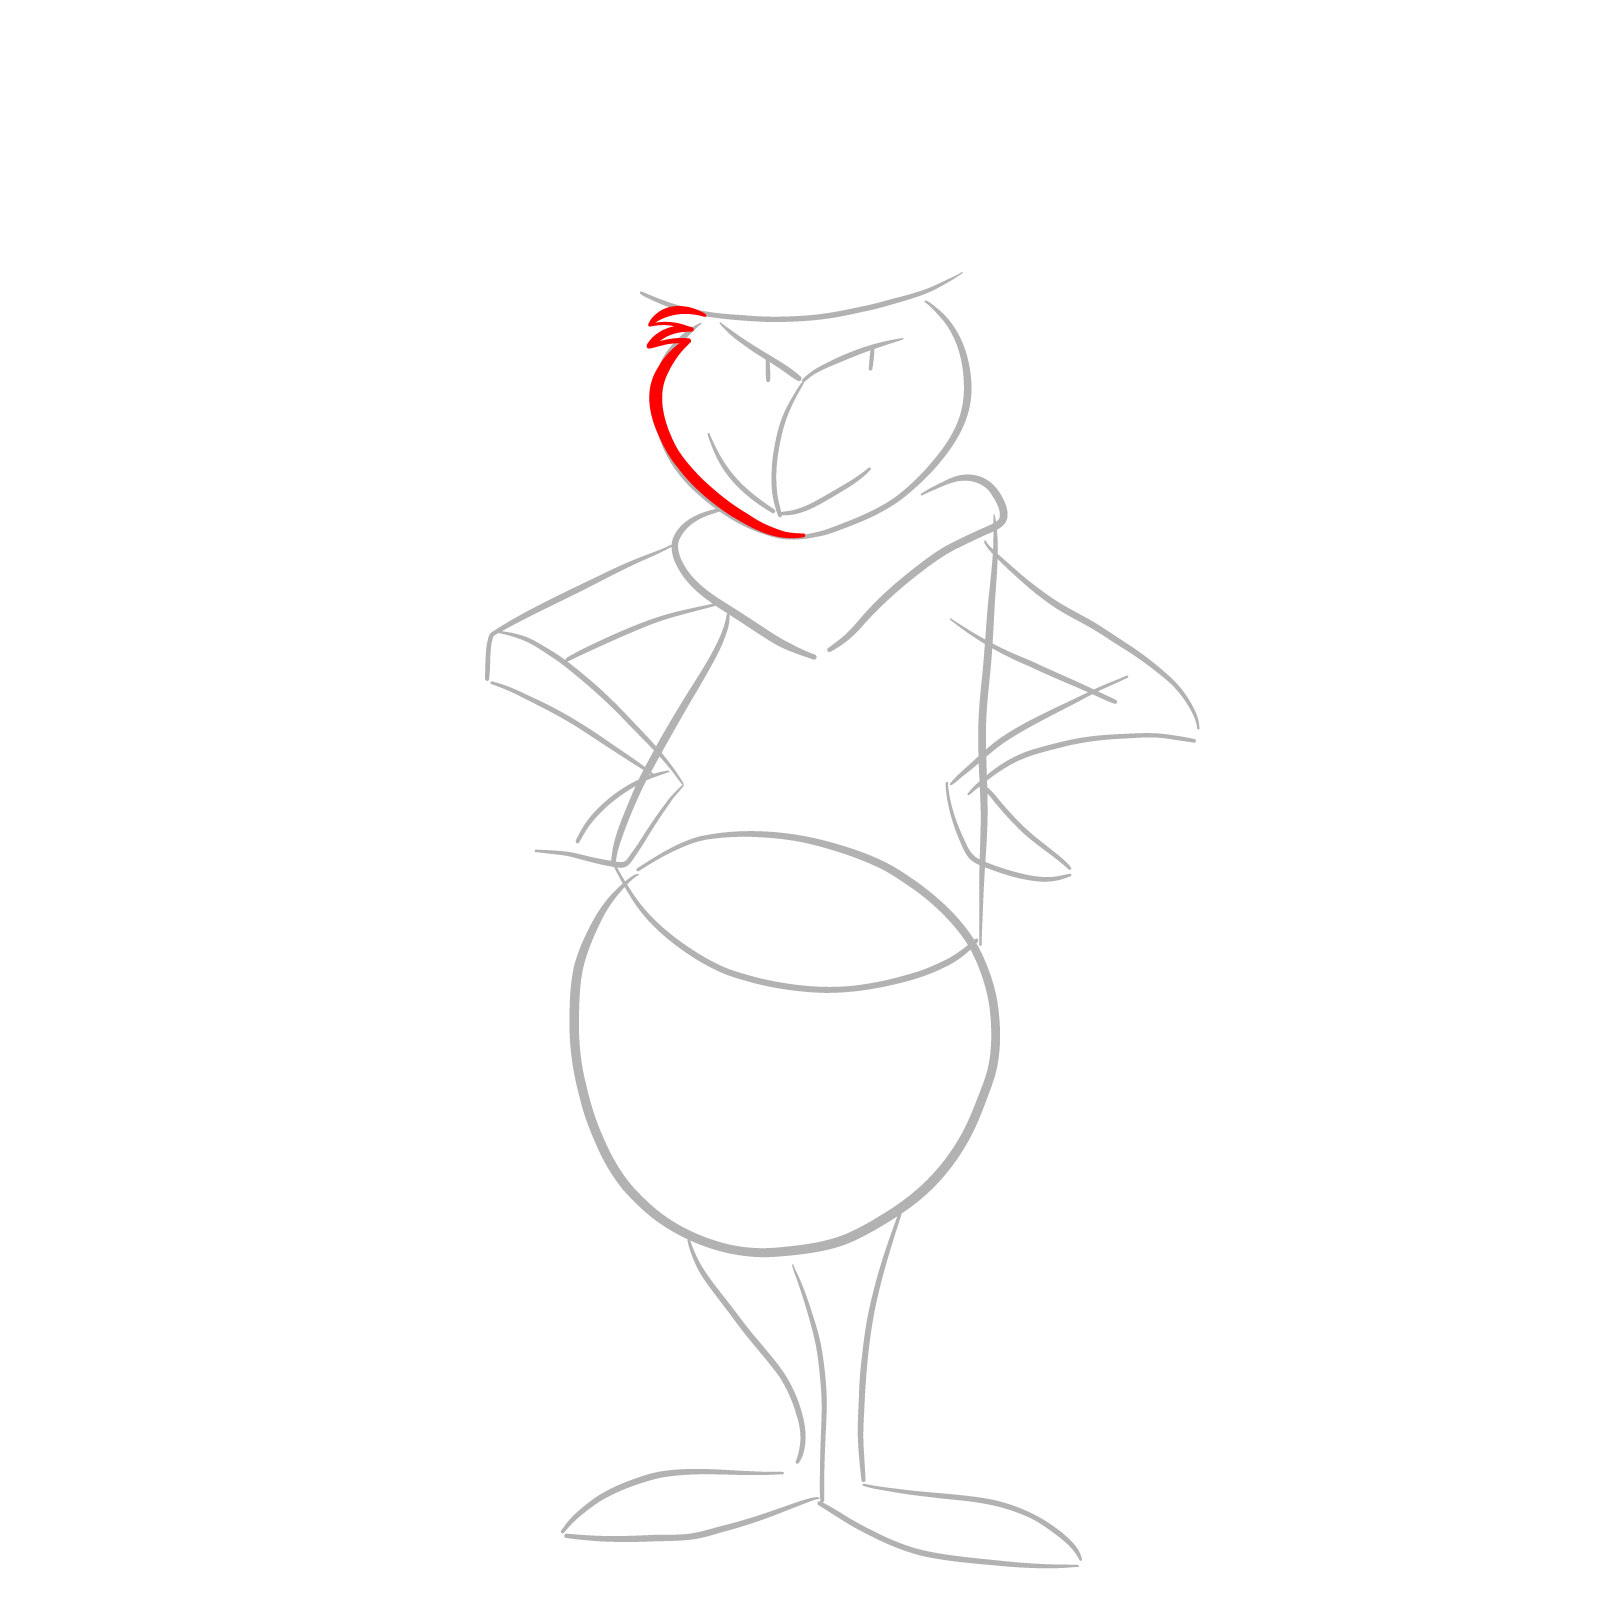 How to draw The Grinch in a Christmas costume - step 04